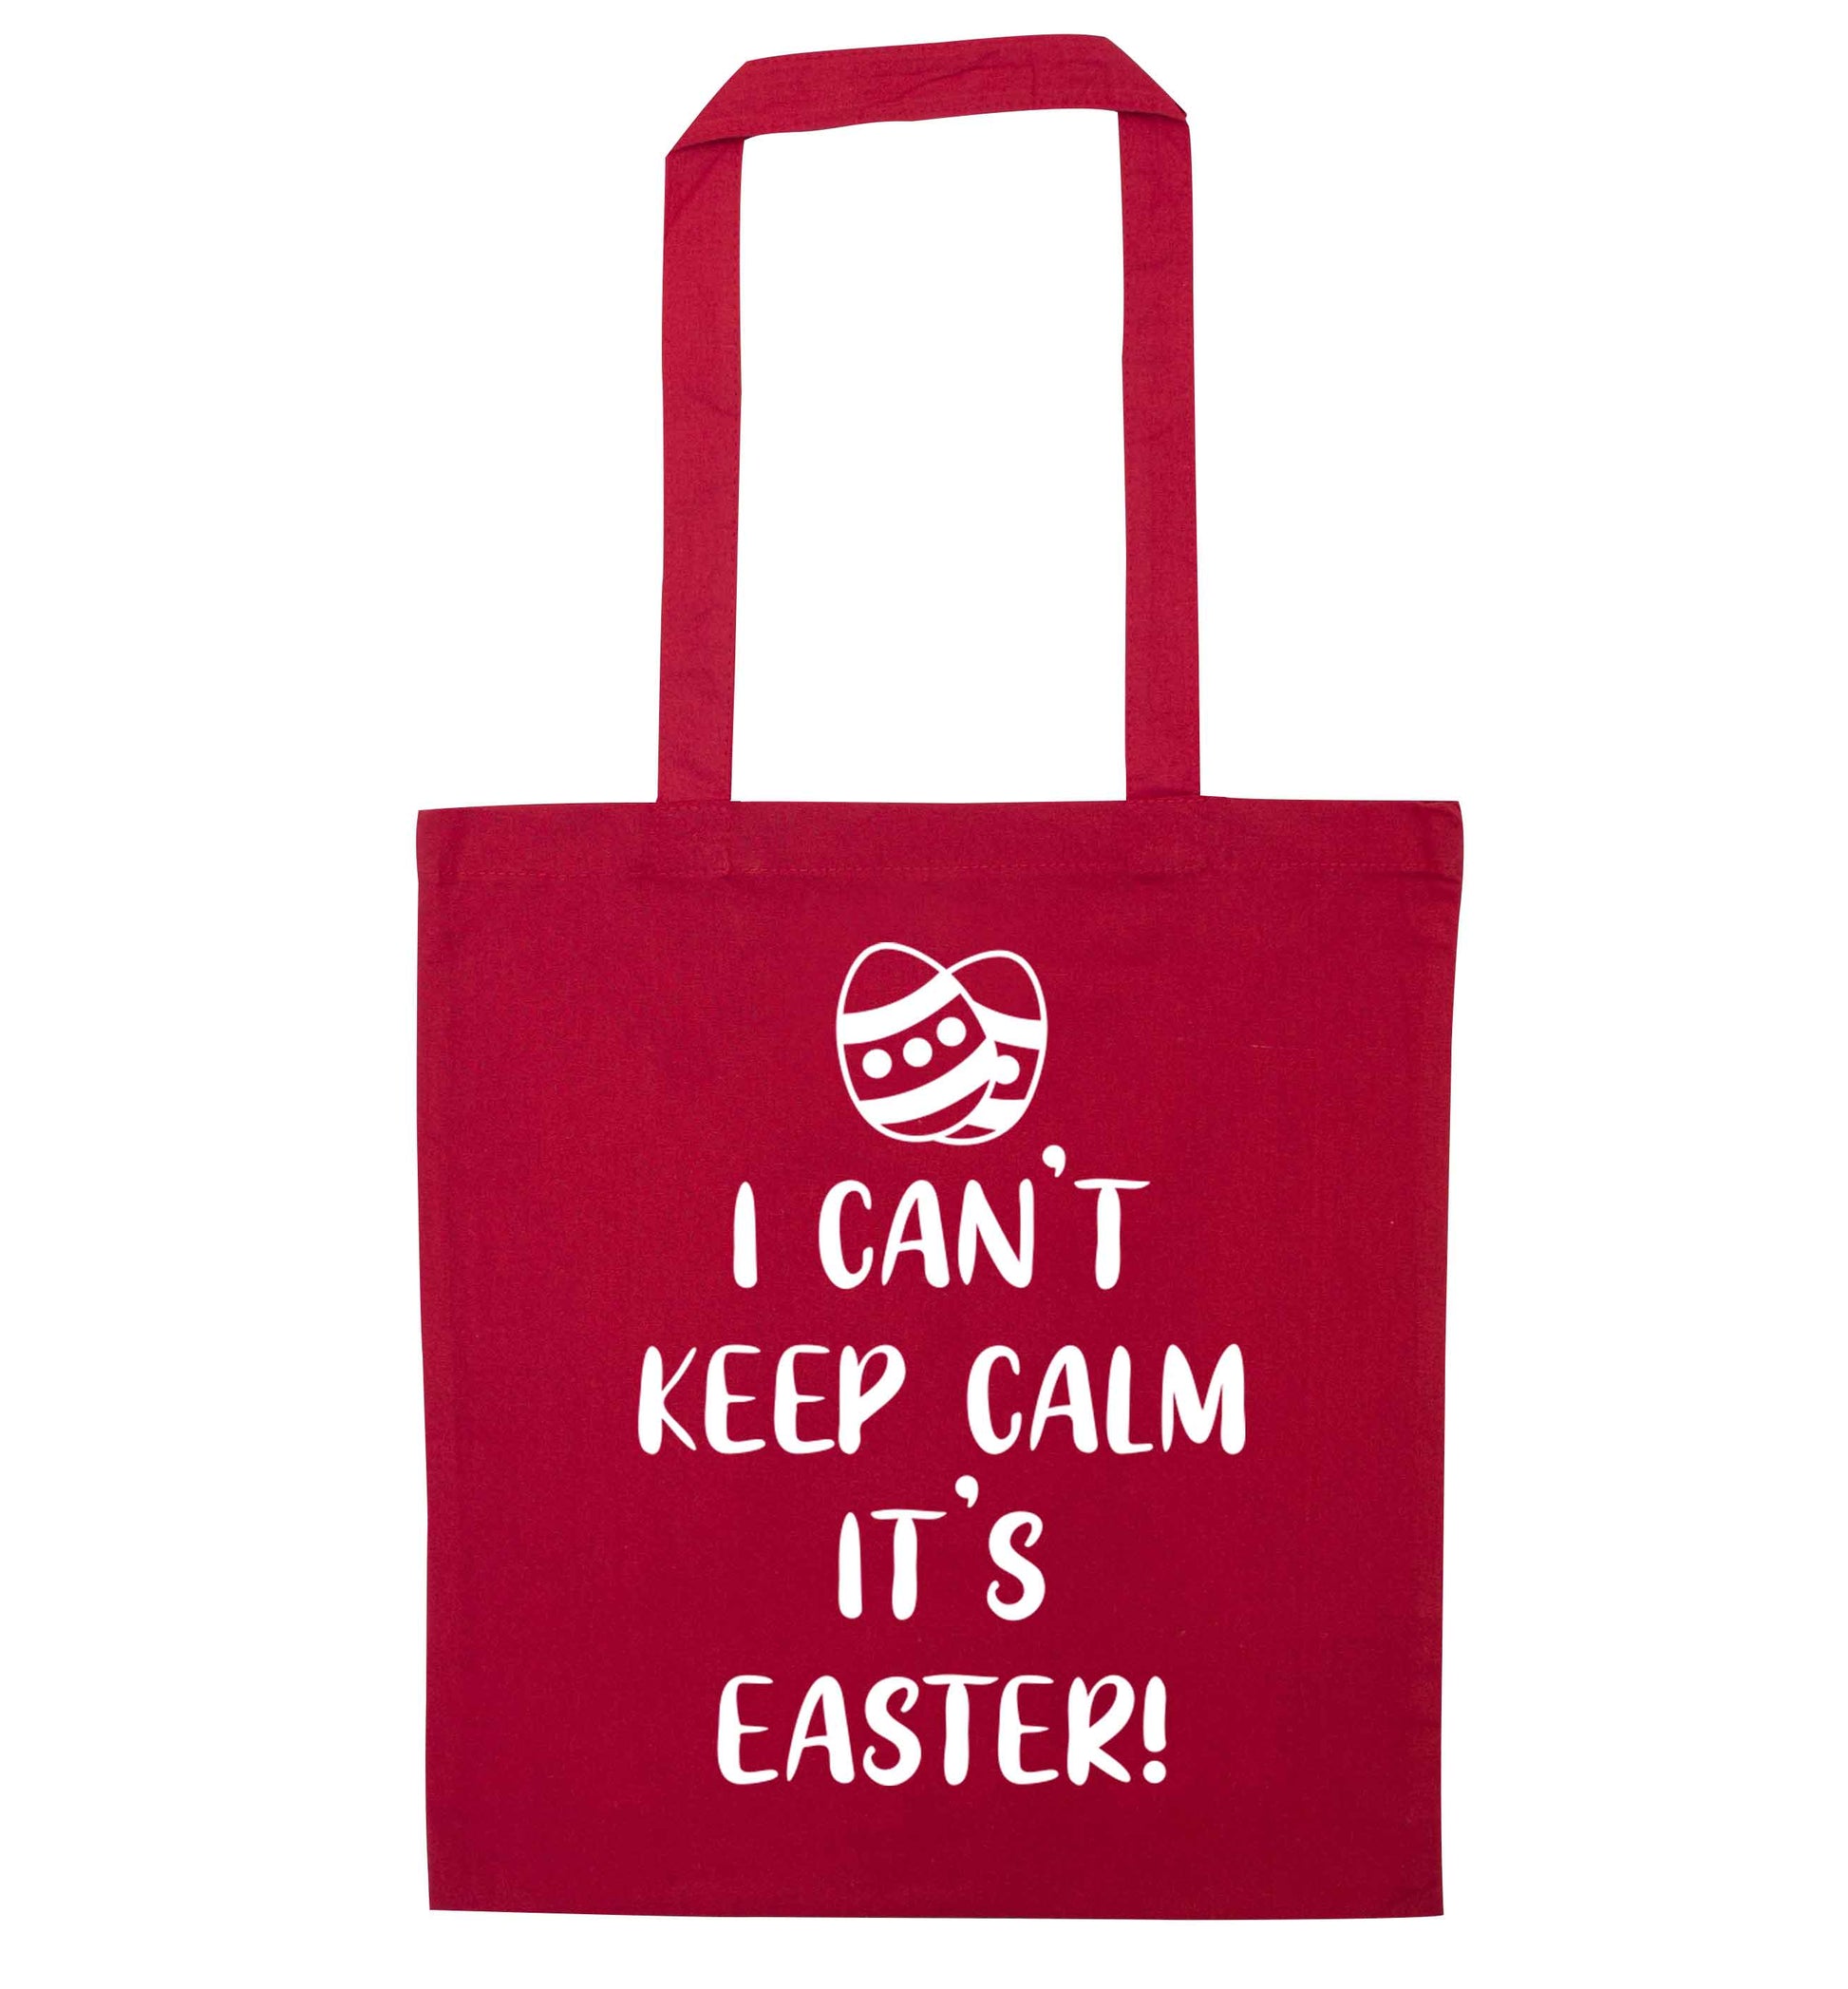 I can't keep calm it's Easter red tote bag